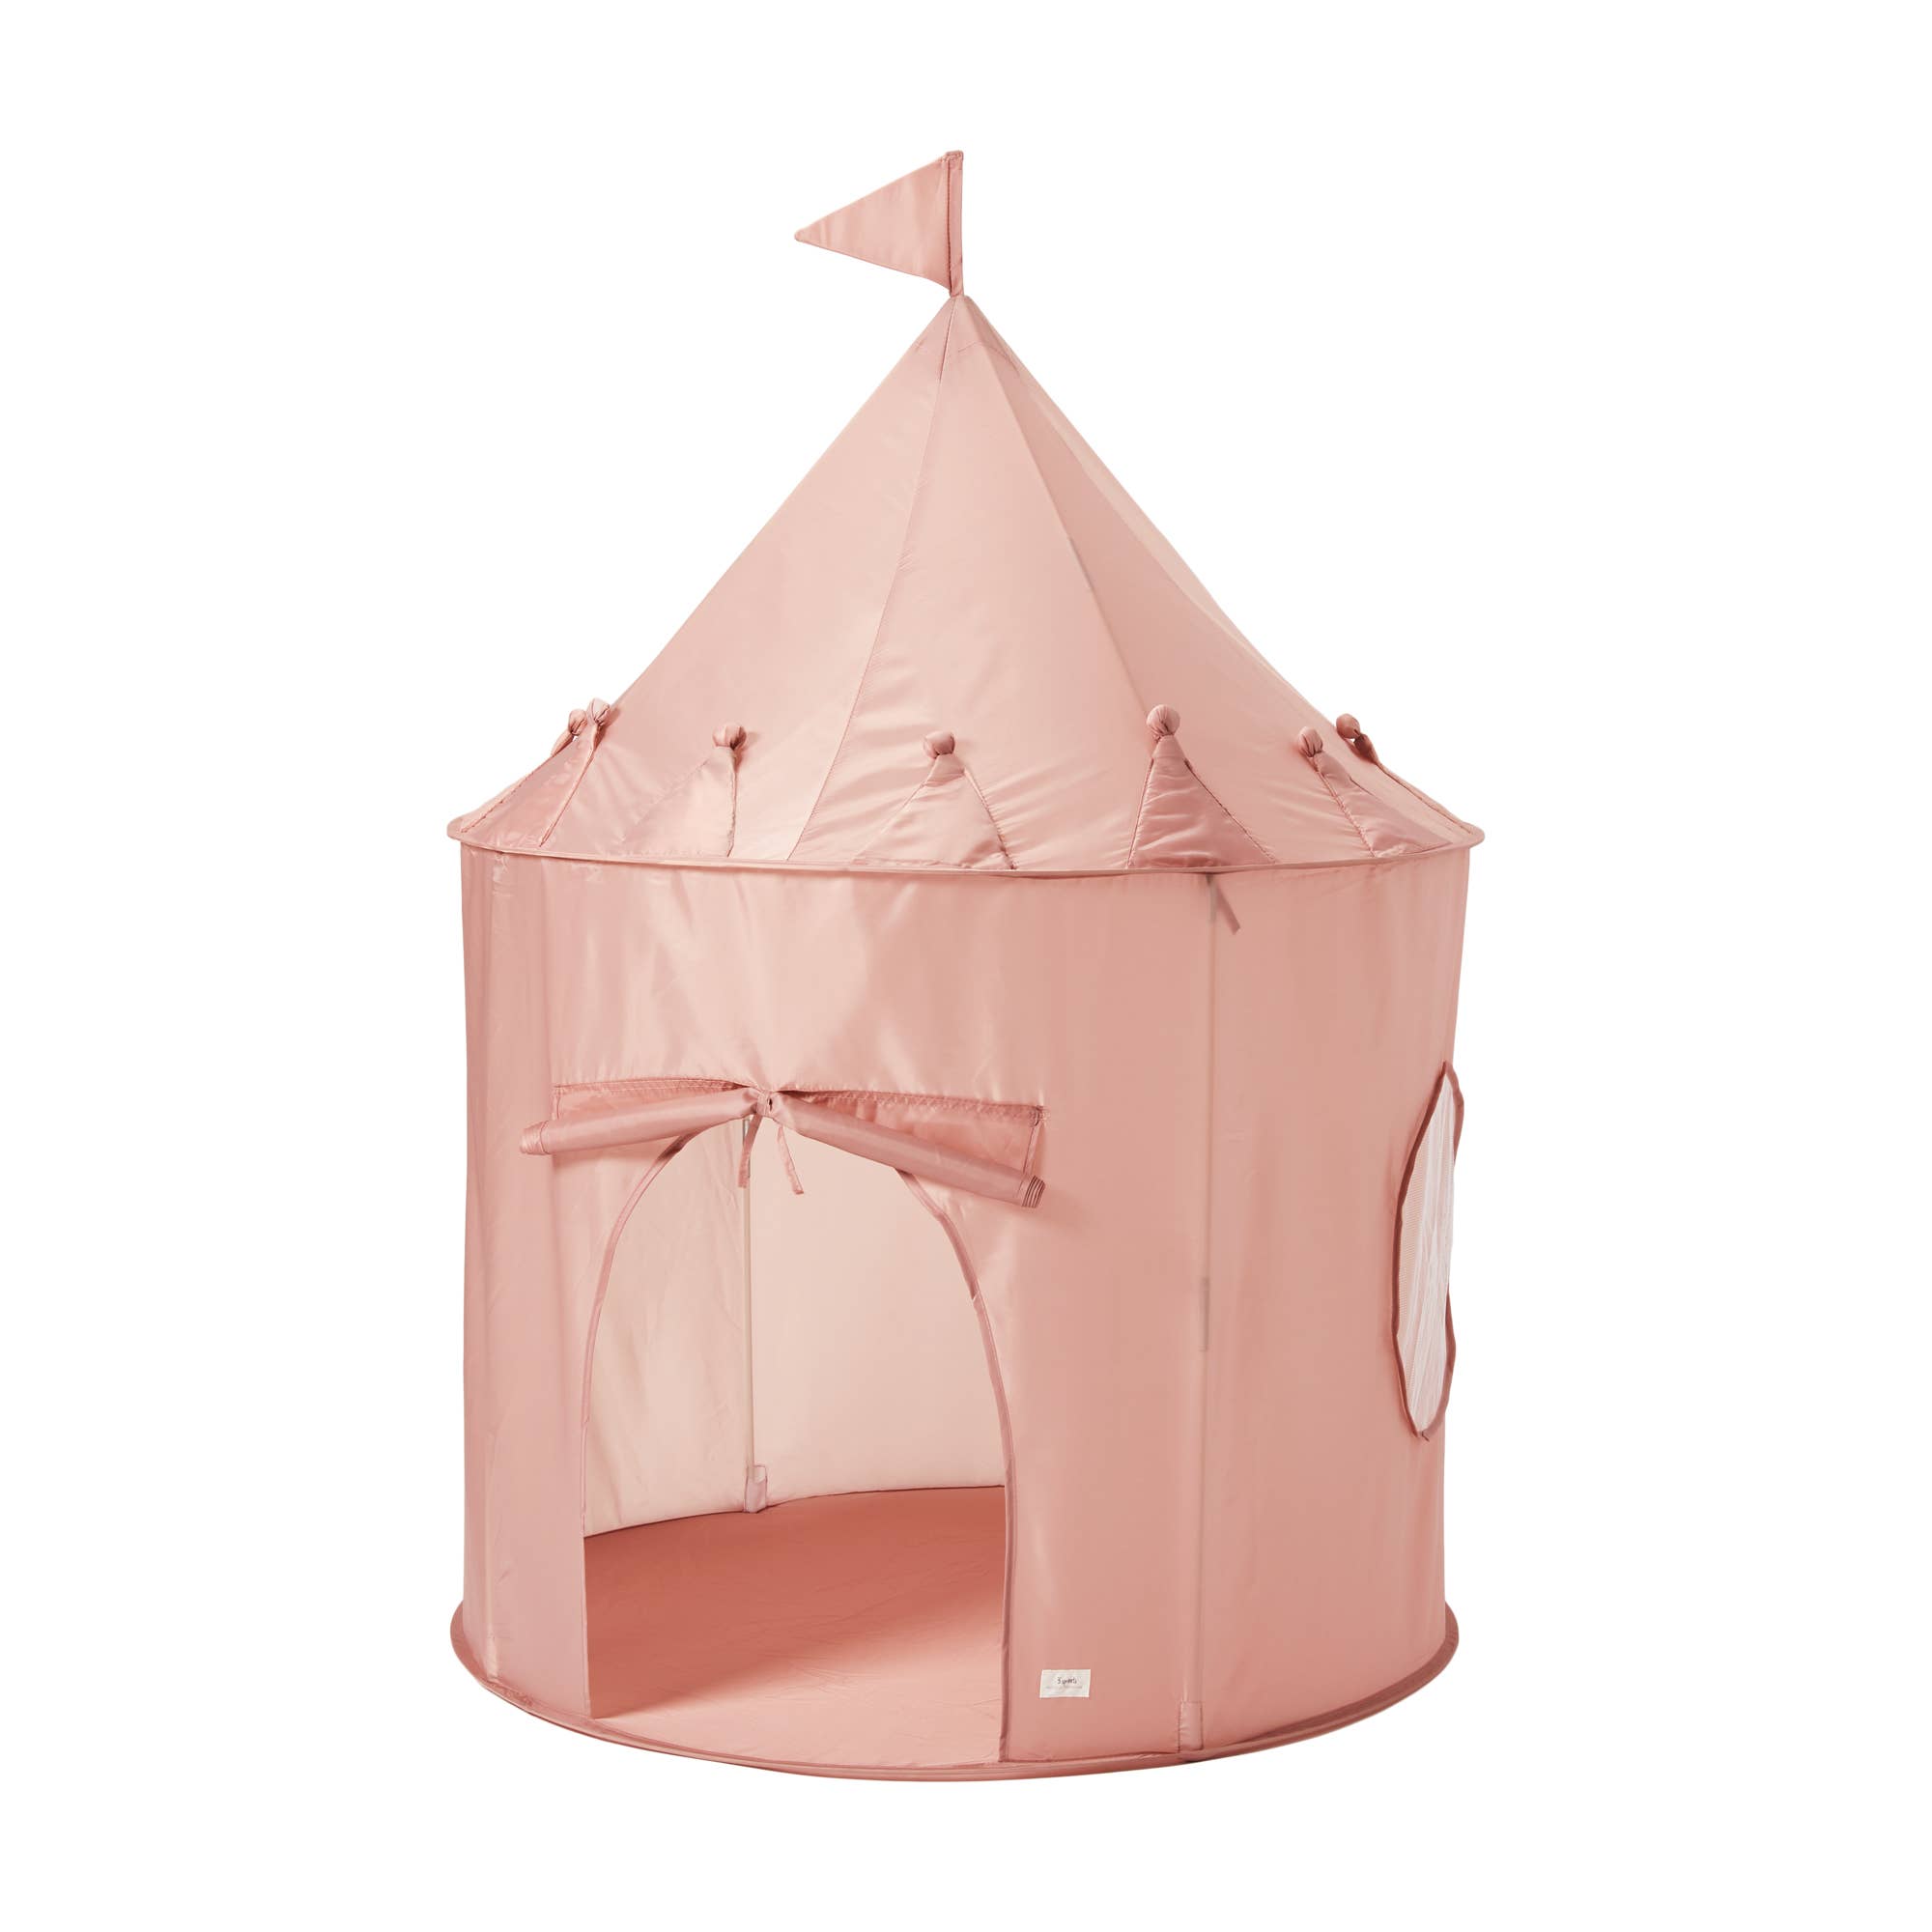 Recycled Fabric Play Tent Castle - Misty Pink